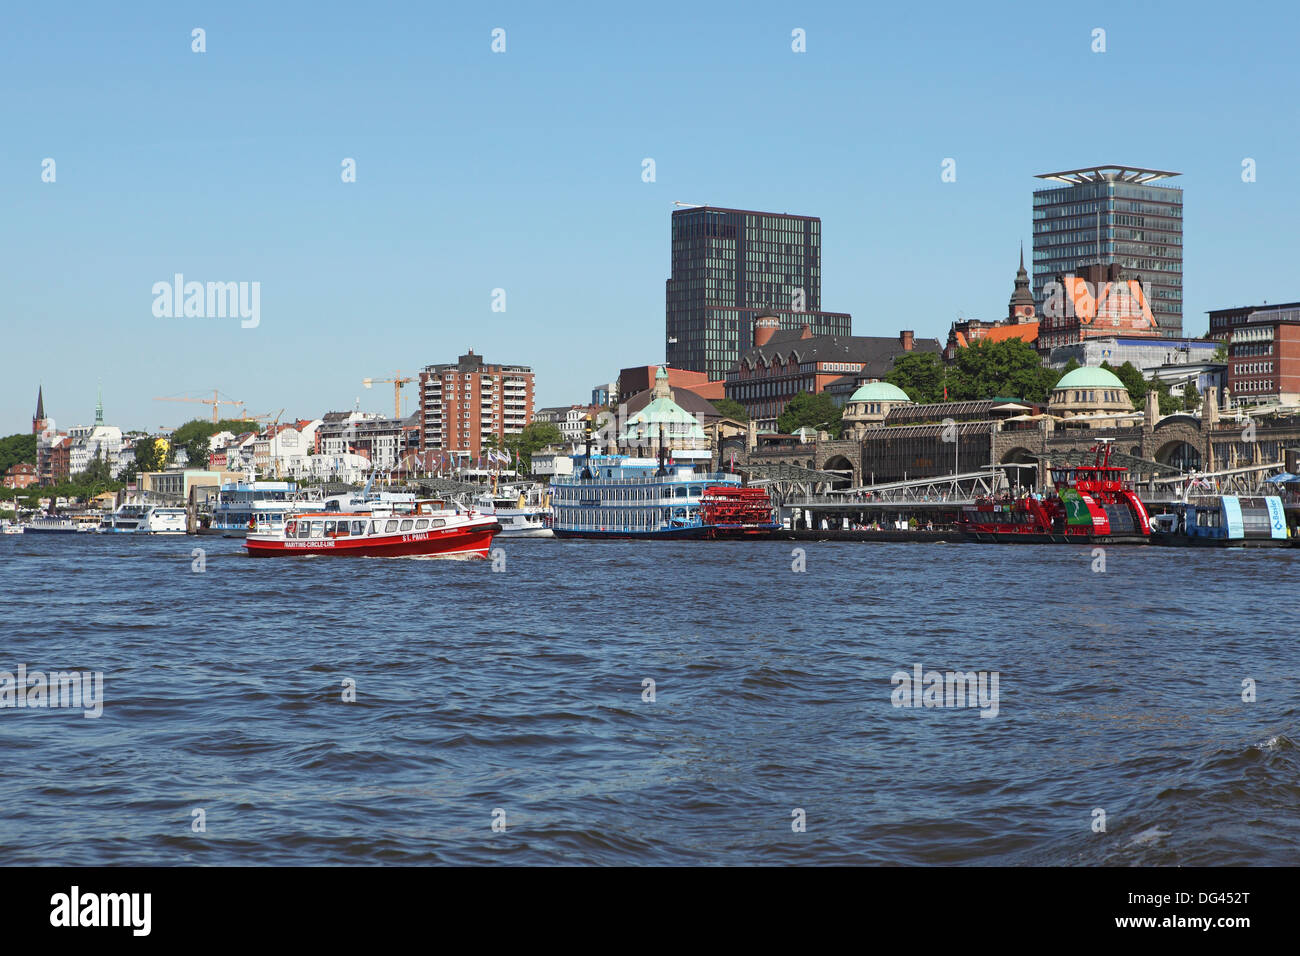 Shipping runs along the waterfront of the St. Pauli district, by the River Elbe, in Hamburg, Germany, Europe Stock Photo